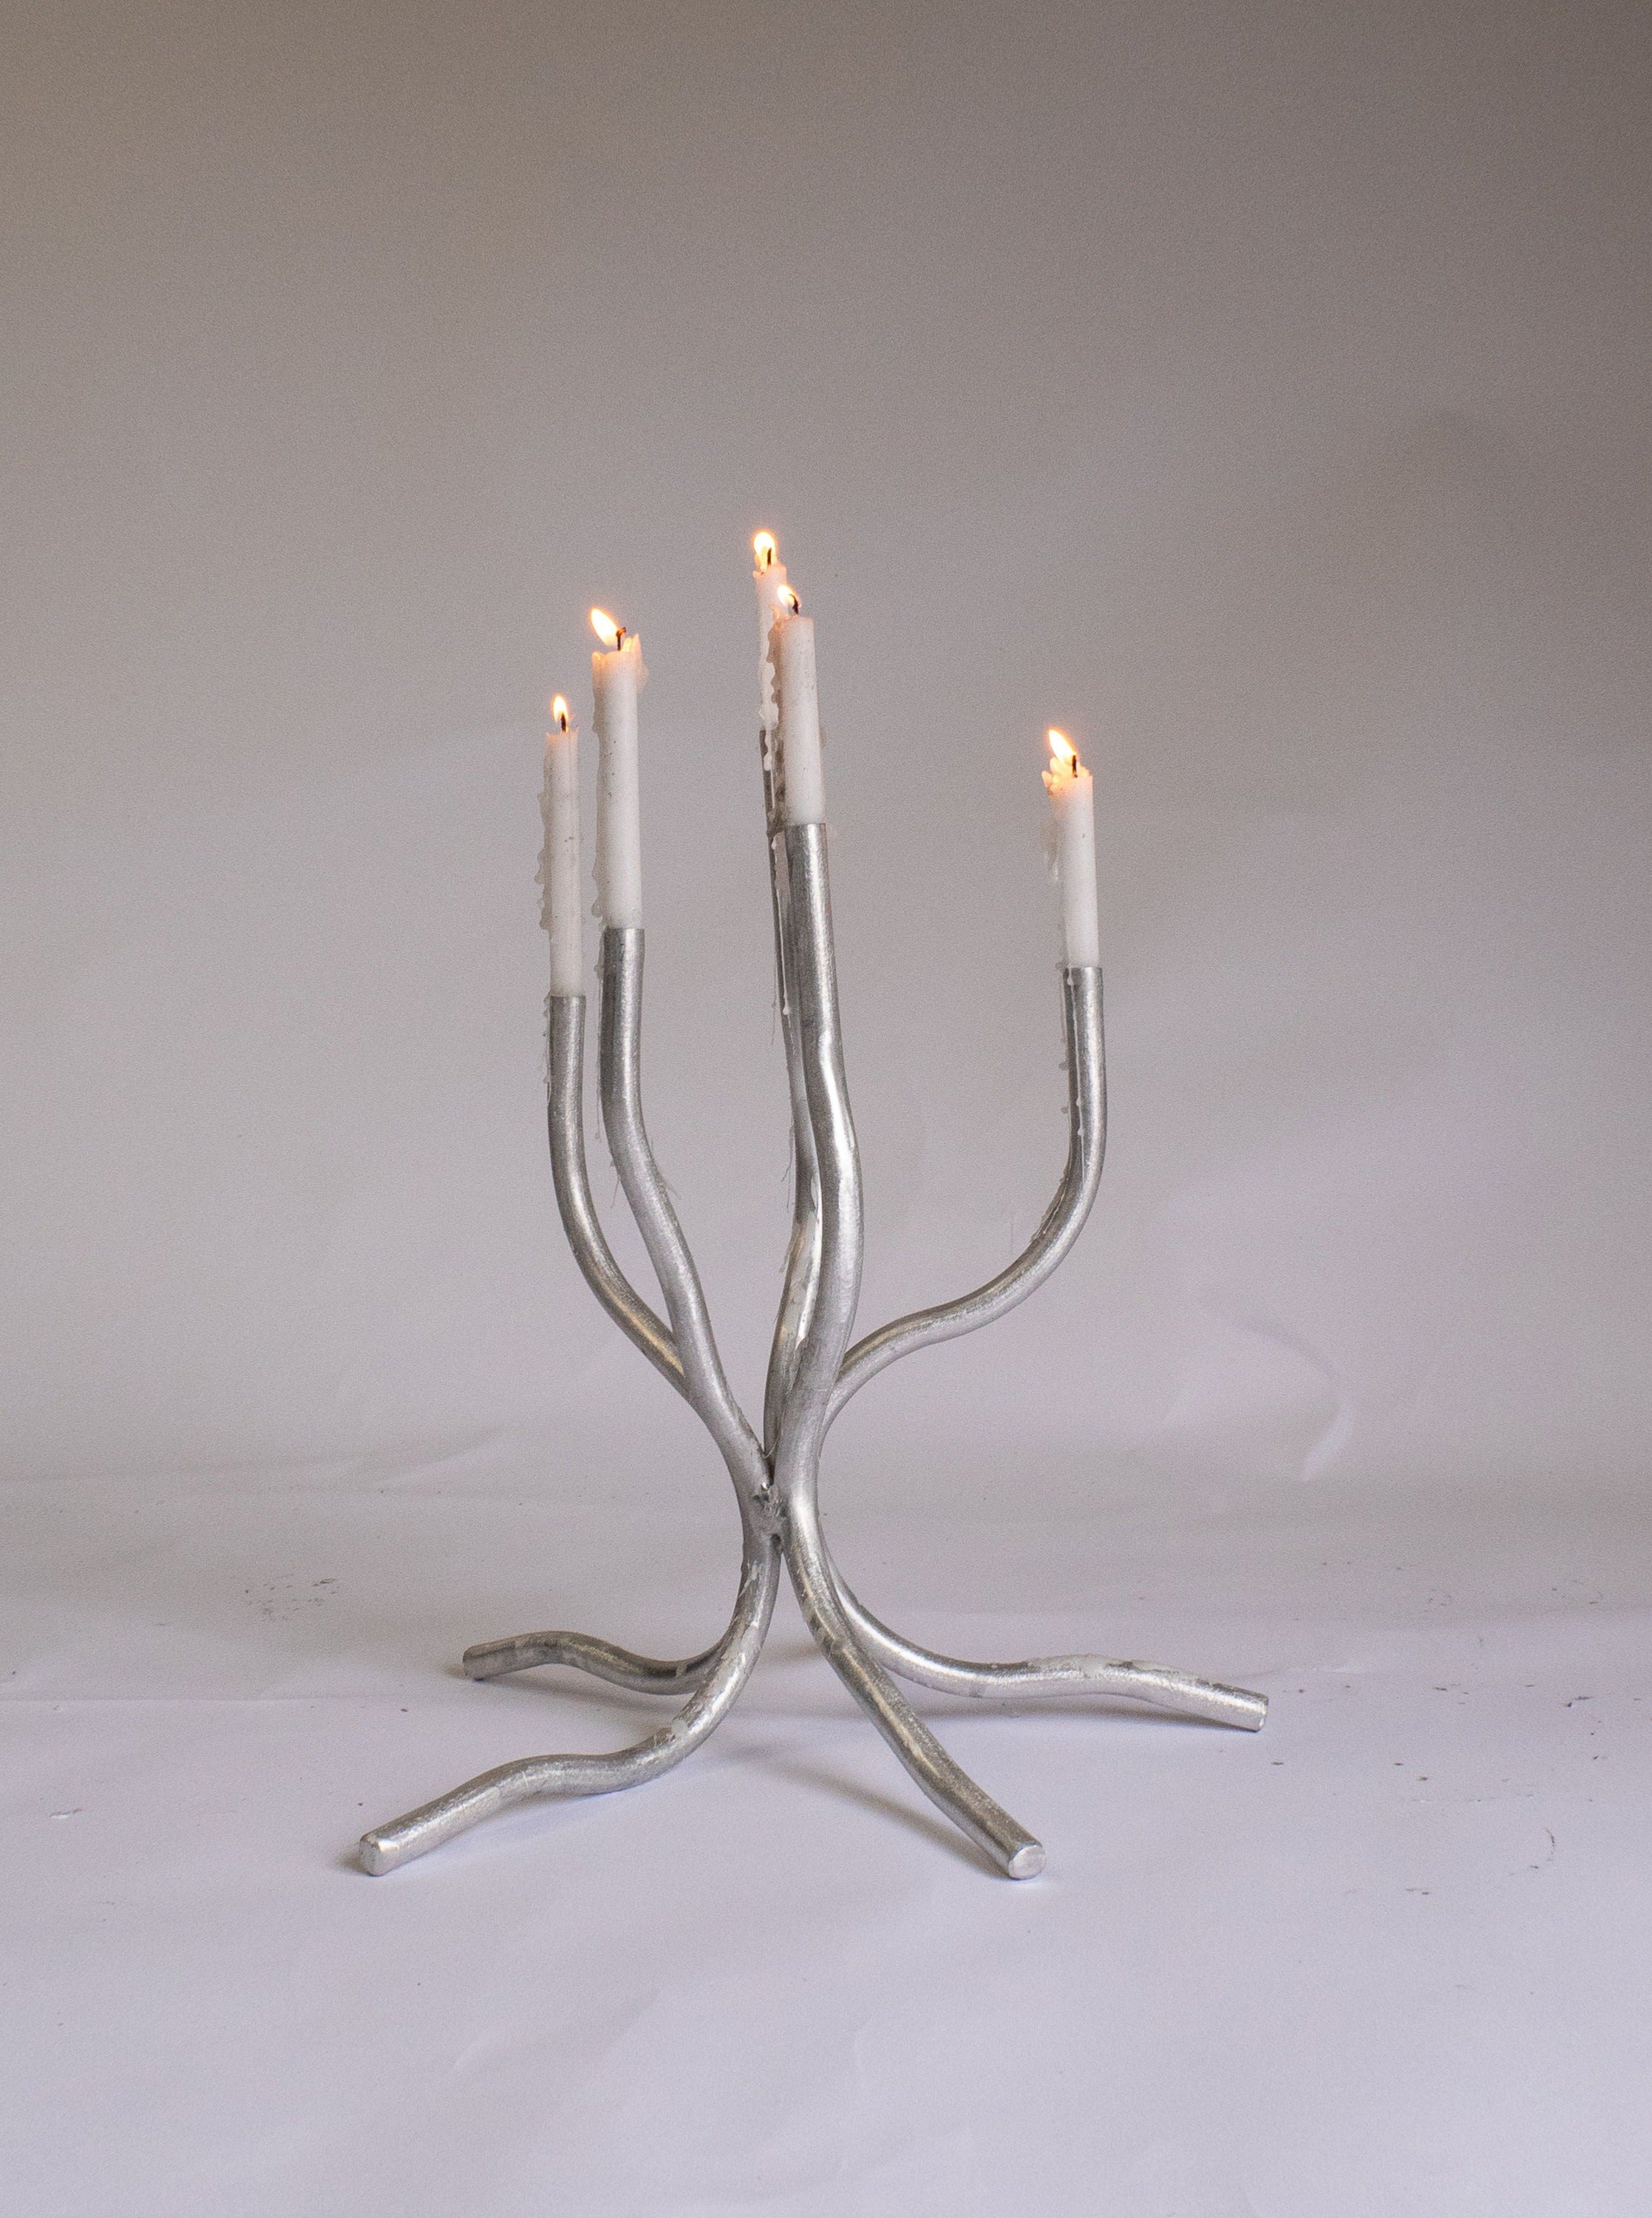 A modern, hand-made Small Candelabra by Six Dots Design with a branched design, displaying four lit taper candles against a plain, light background.